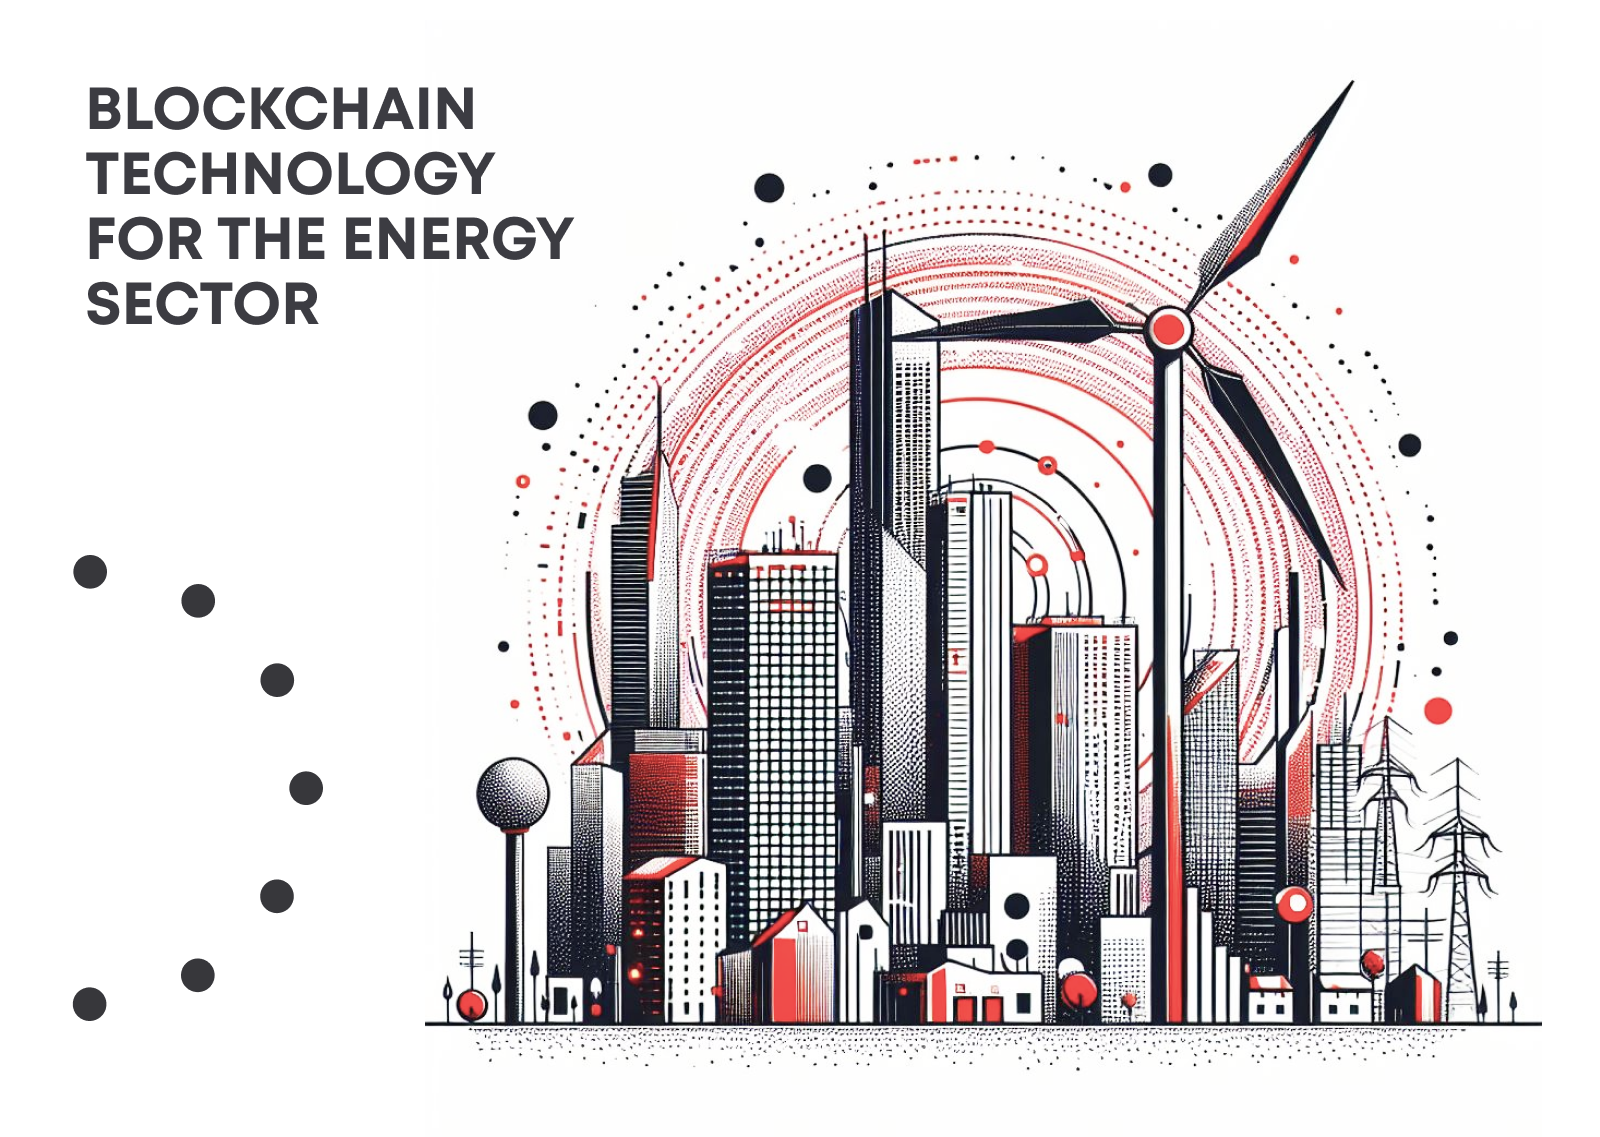 The integration of blockchain in the energy sector is a practical innovation that addresses real-world issues